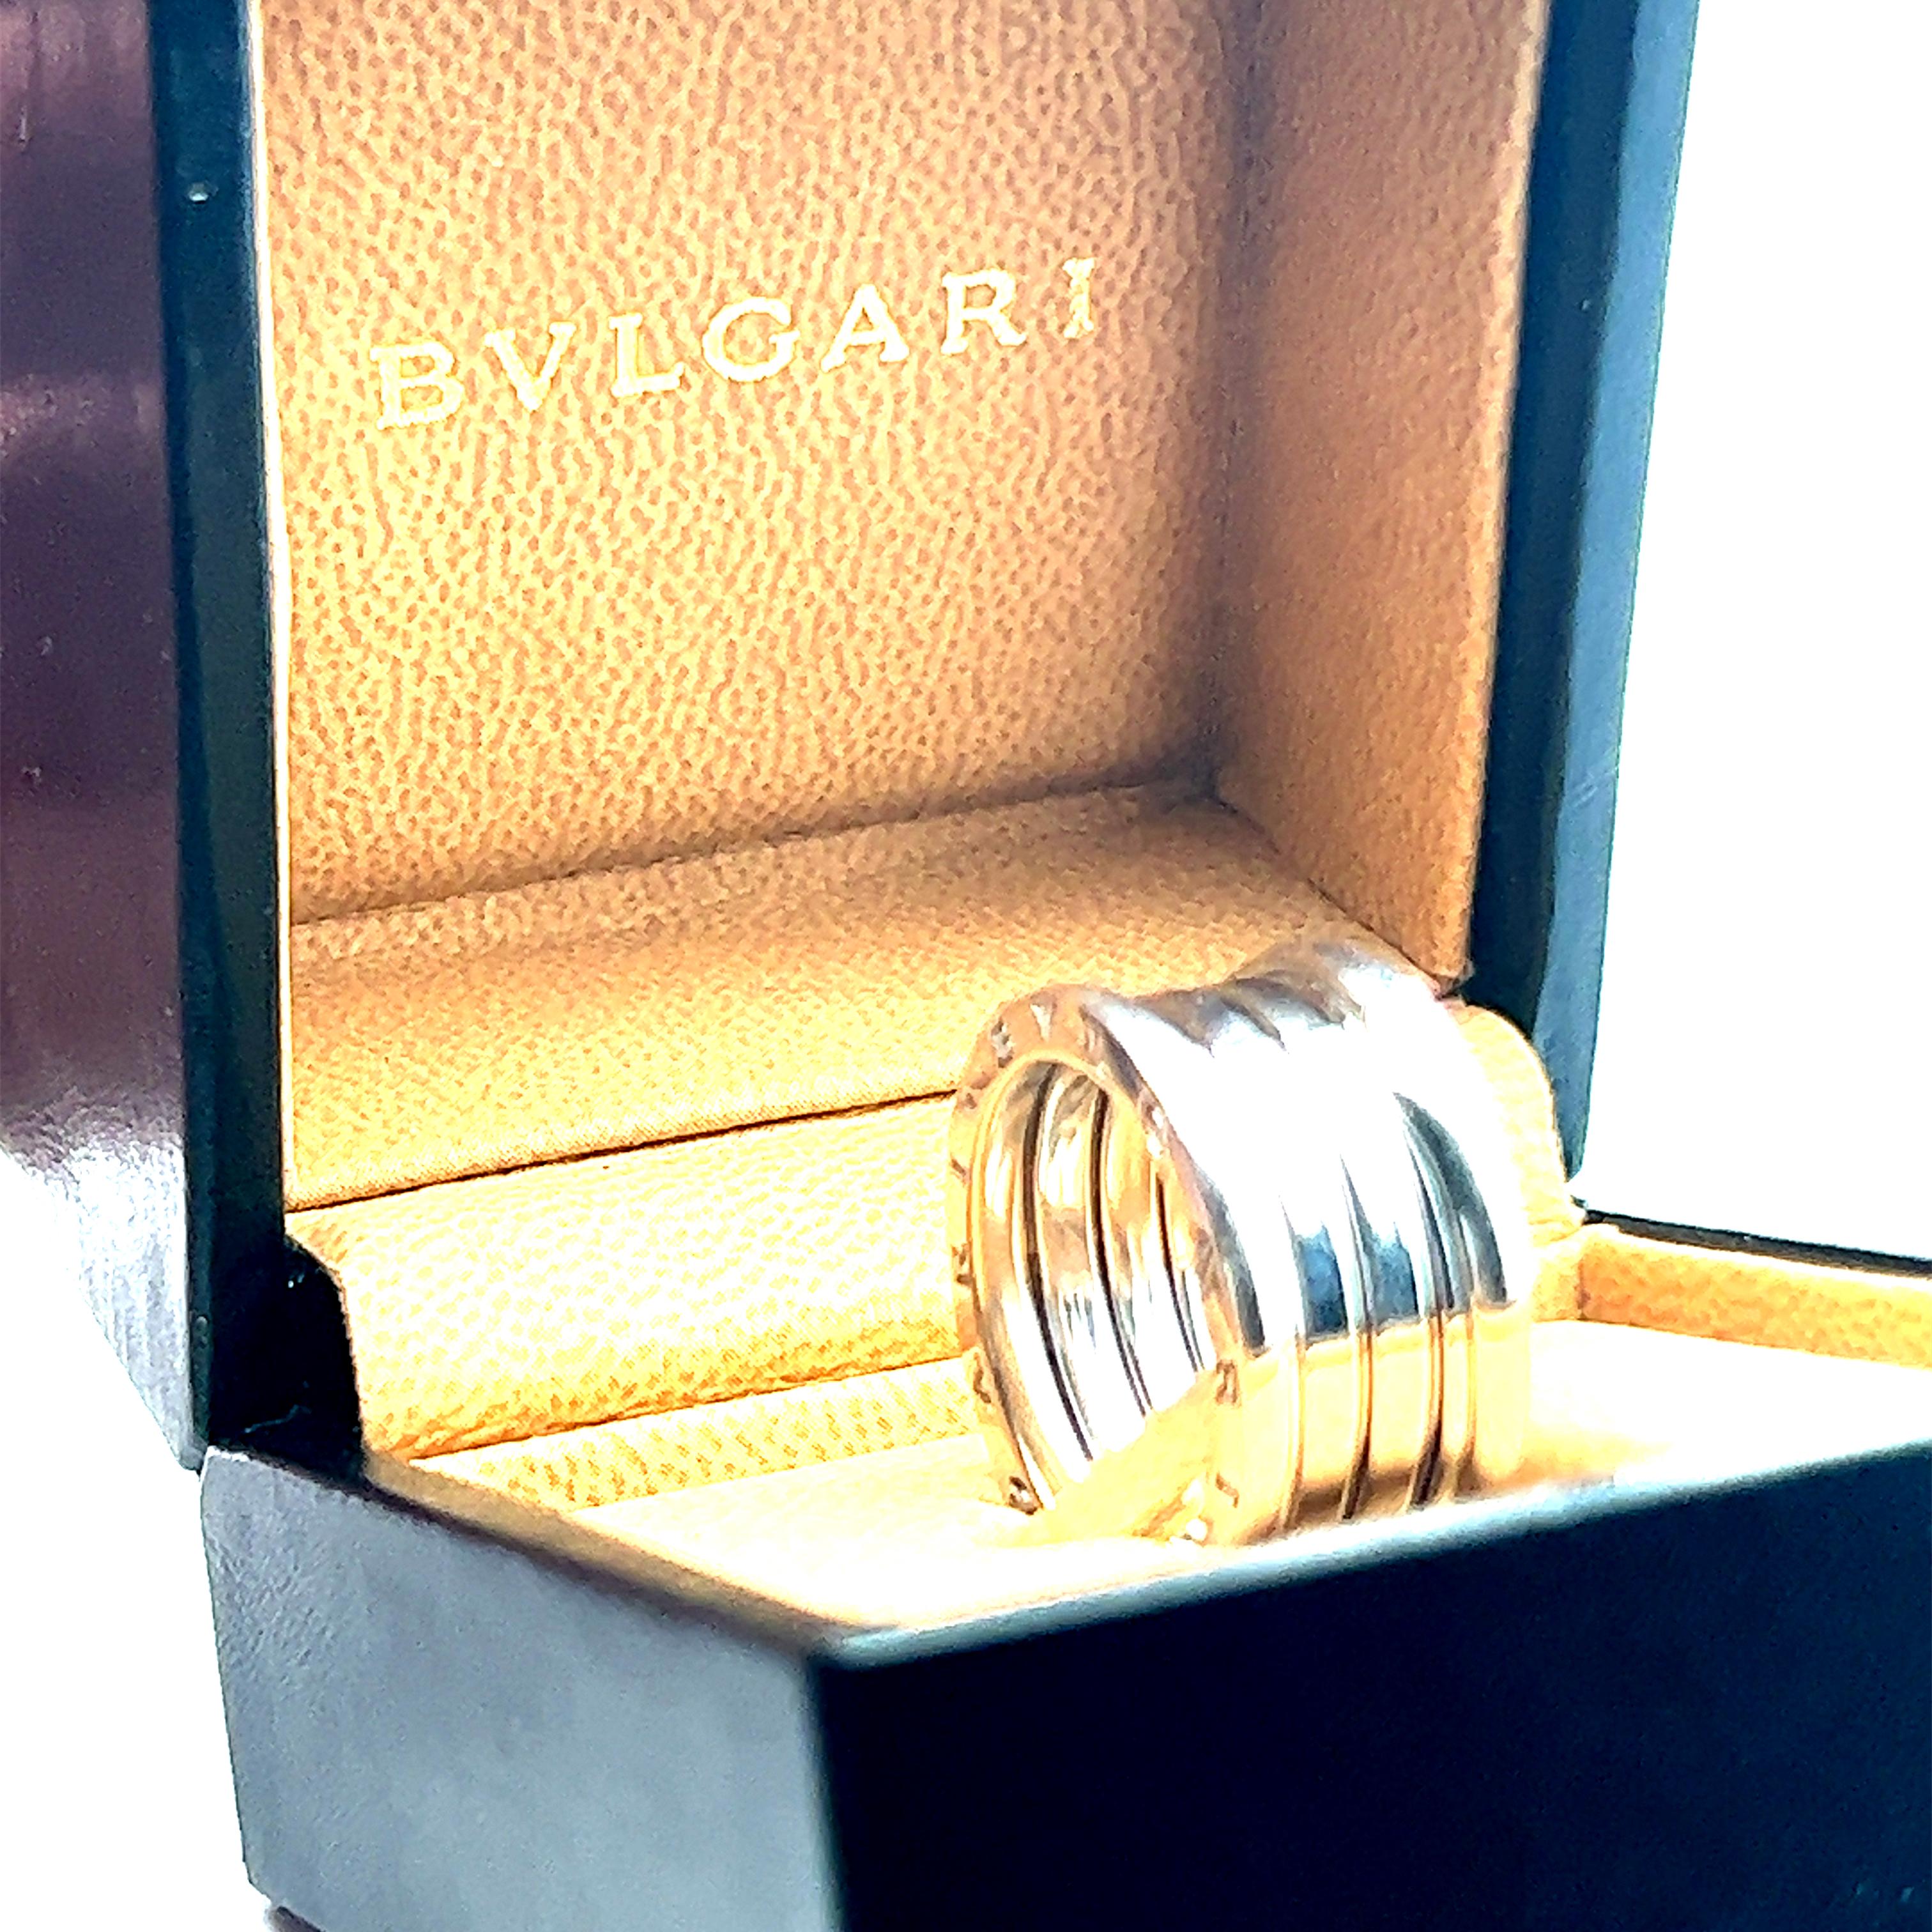 Drawing its inspiration from the most renowned amphitheater of the world, the Colosseum, the B.zero1 ring is a true statement of Bulgari’s creative vision, challenging the very essence of jewellery design. The purity of its distinctive spiral is a